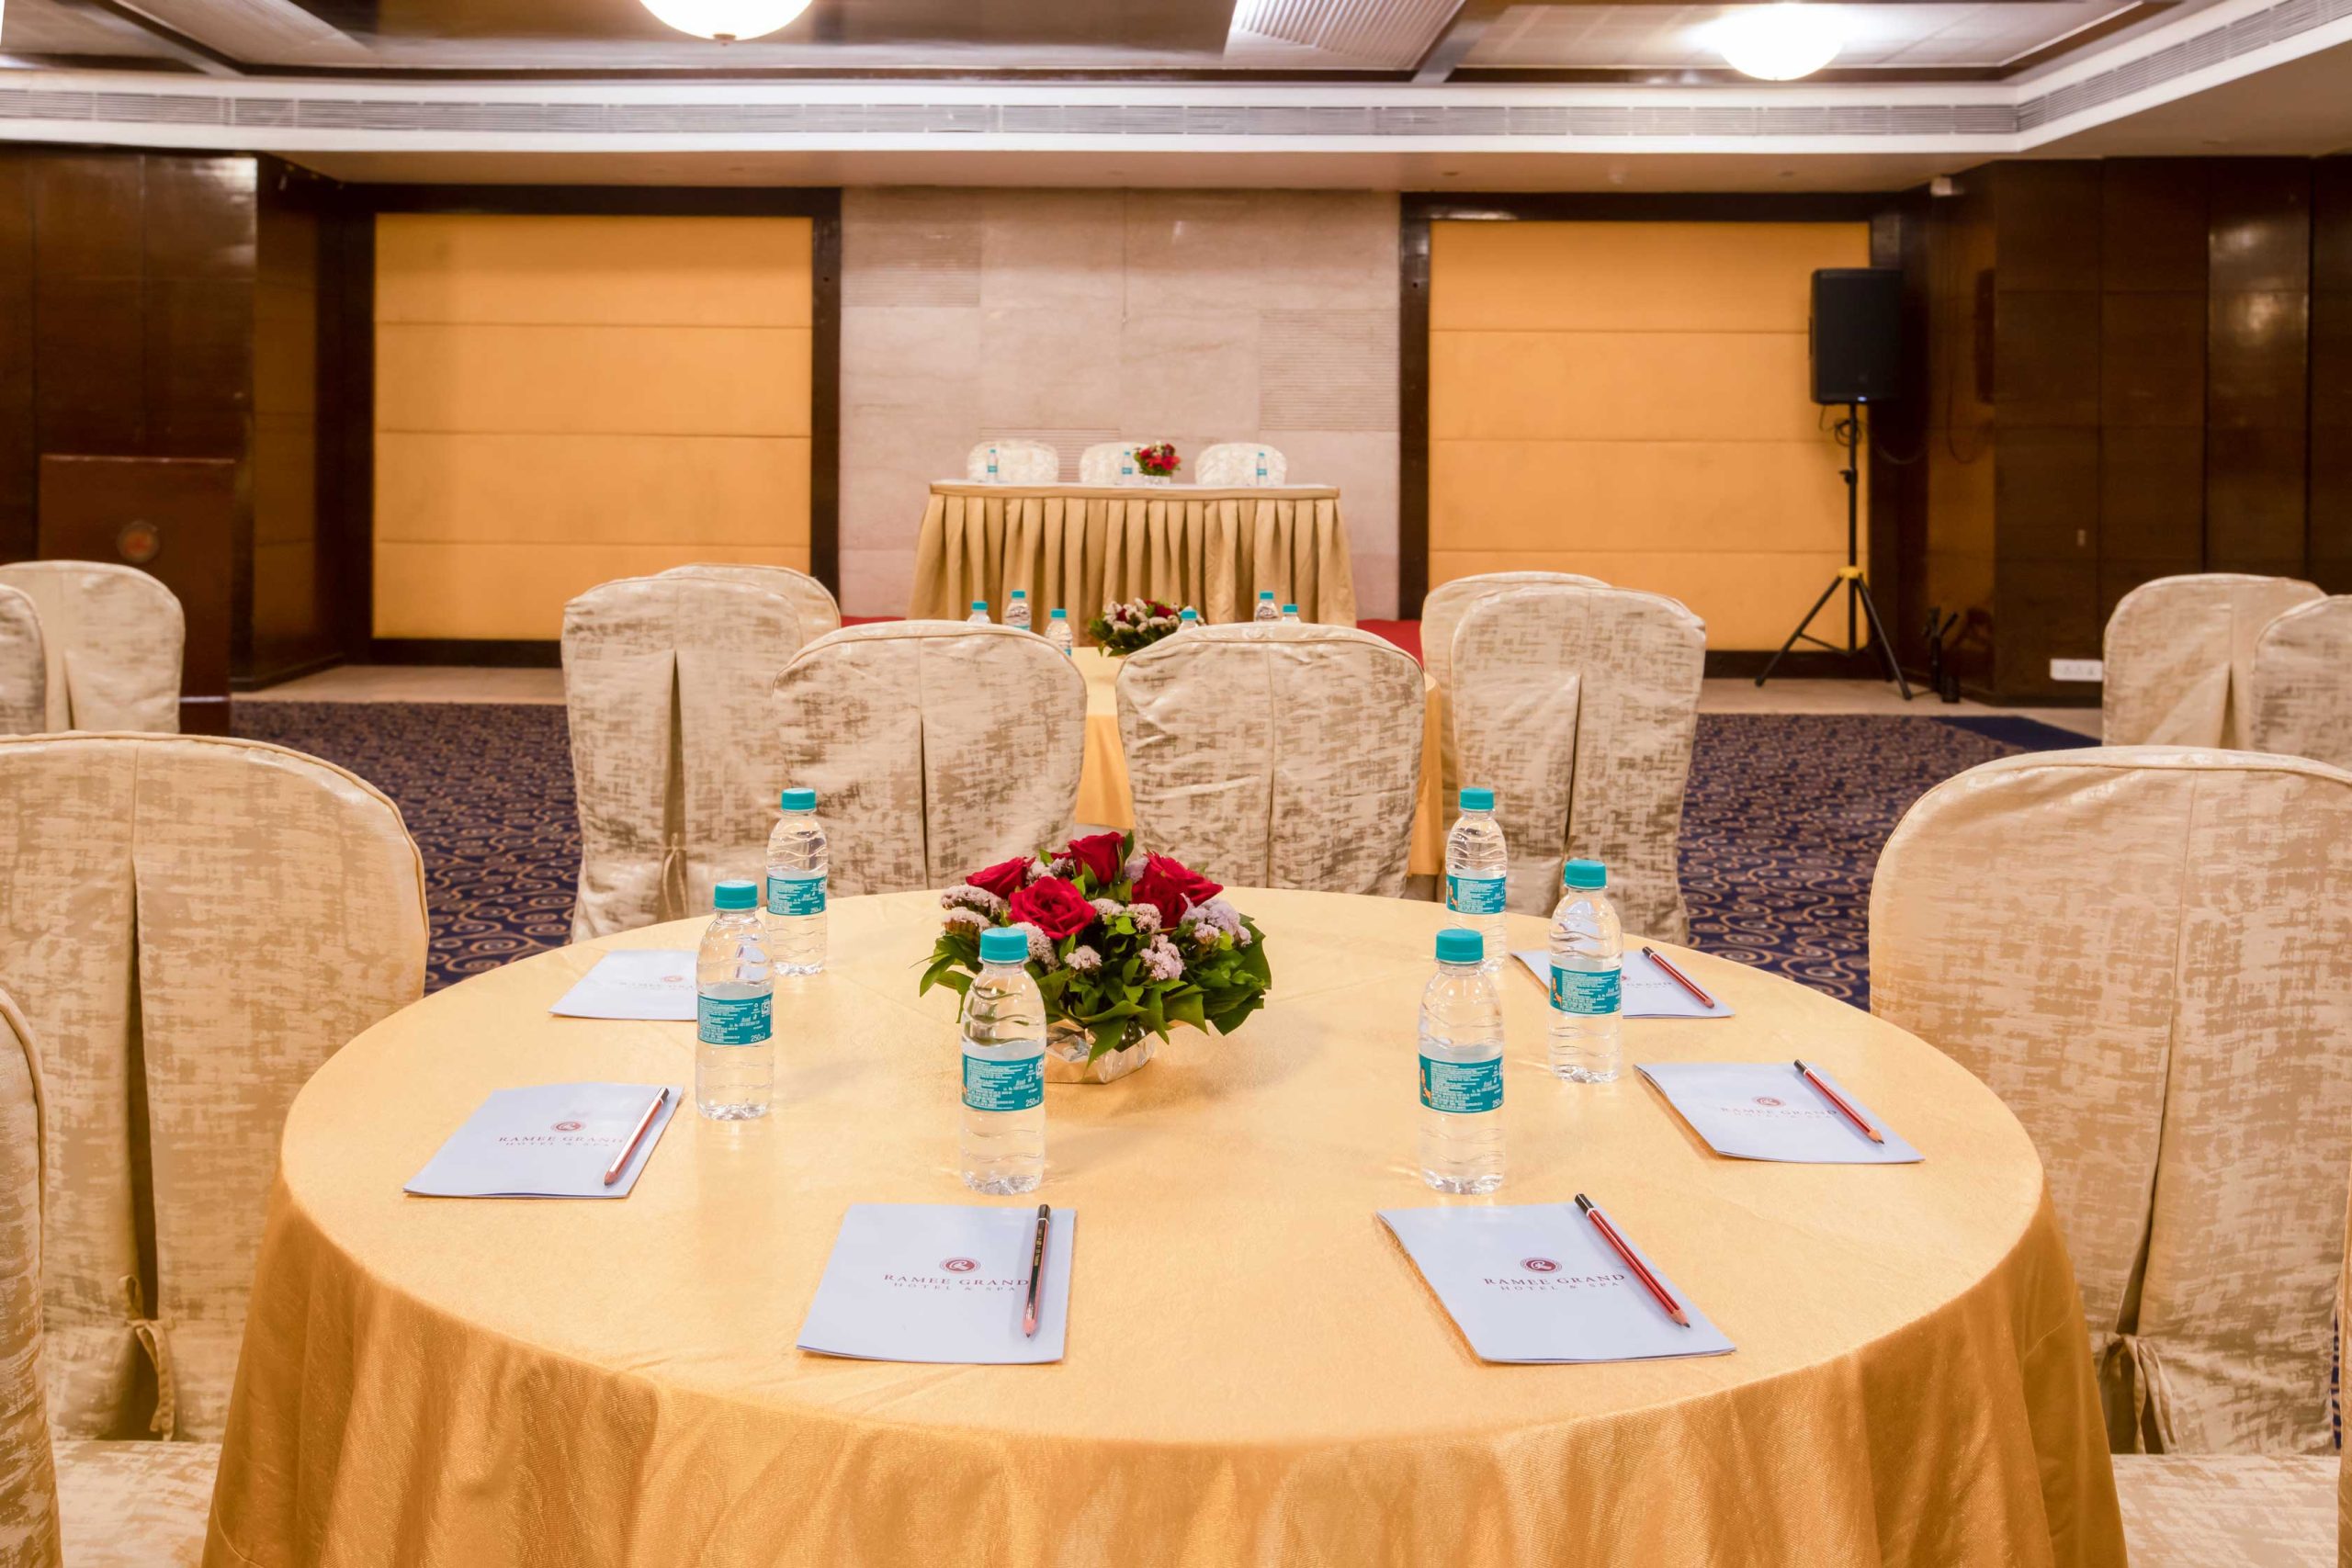 Imperial-banquet-hall-in-pune-at-ramee-grand-hotel-on-apte-road.